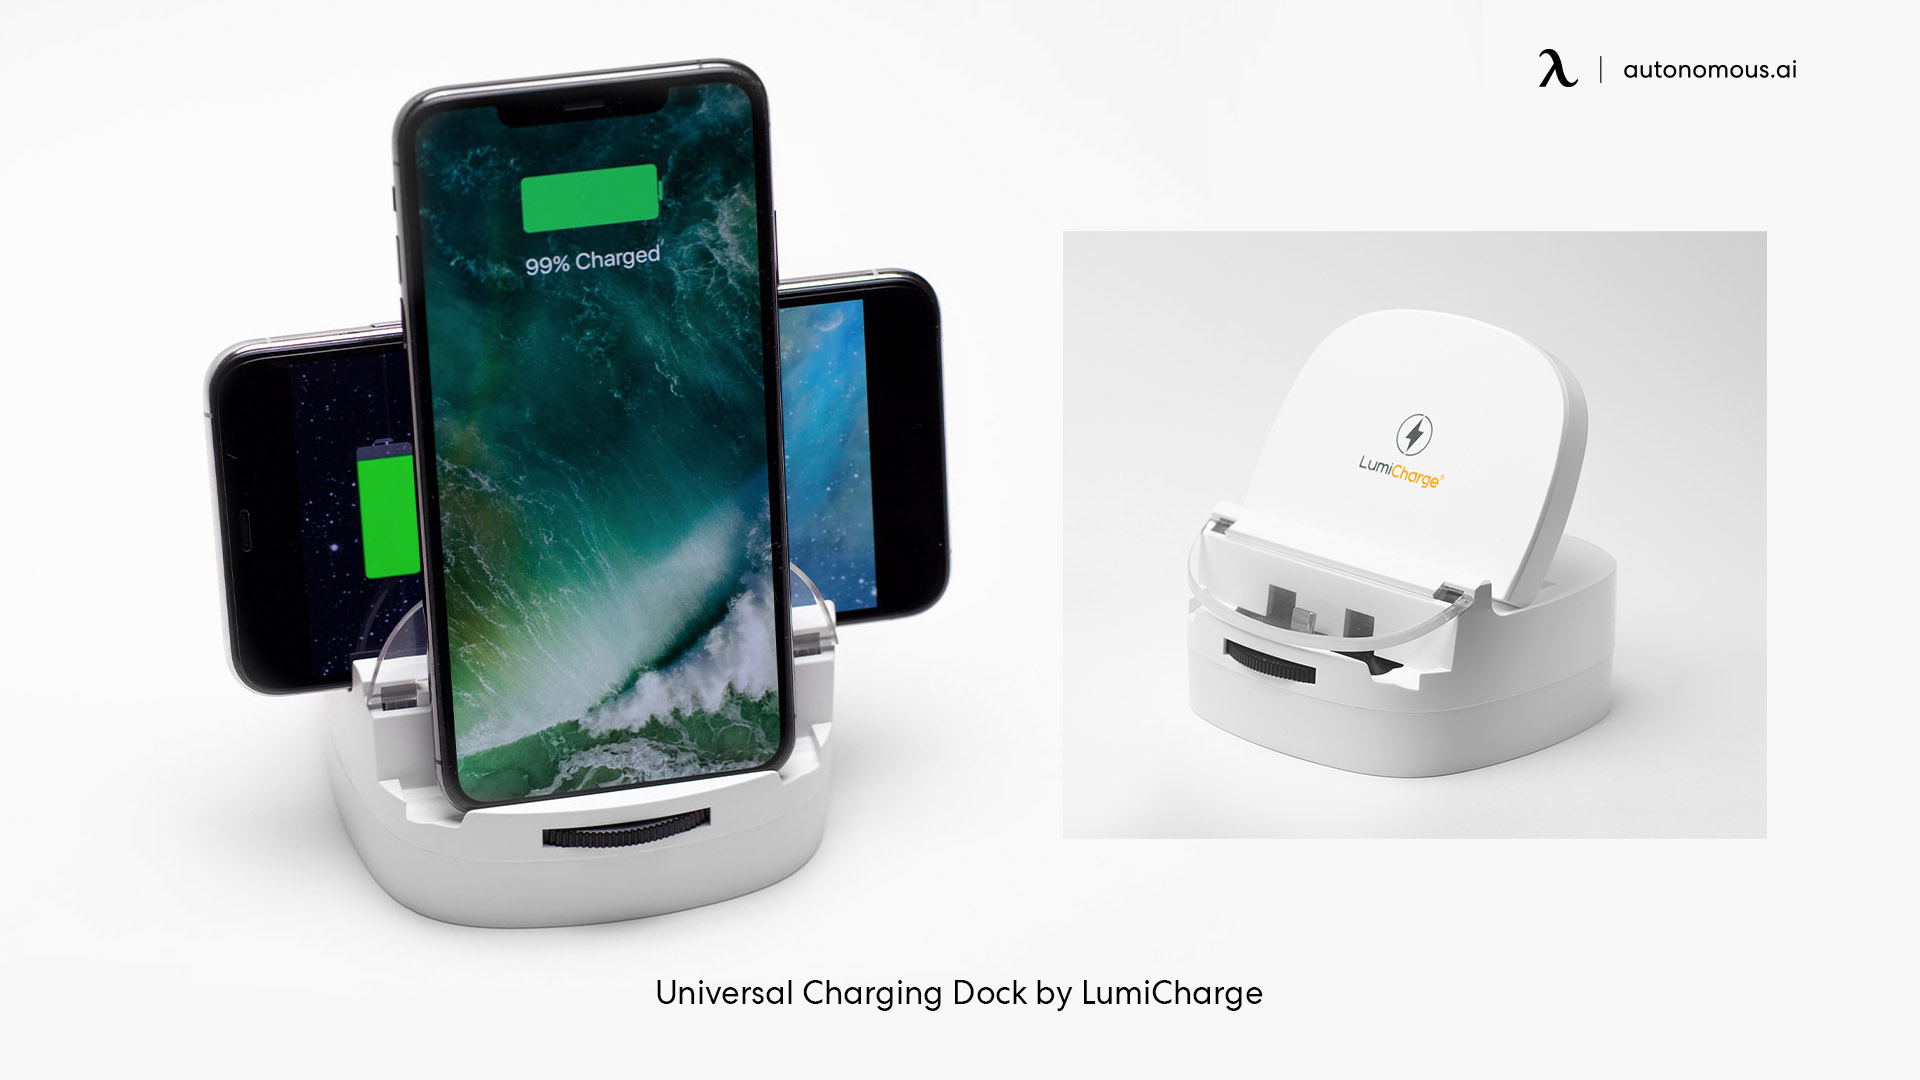 Universal Charging Dock by LumiCharge